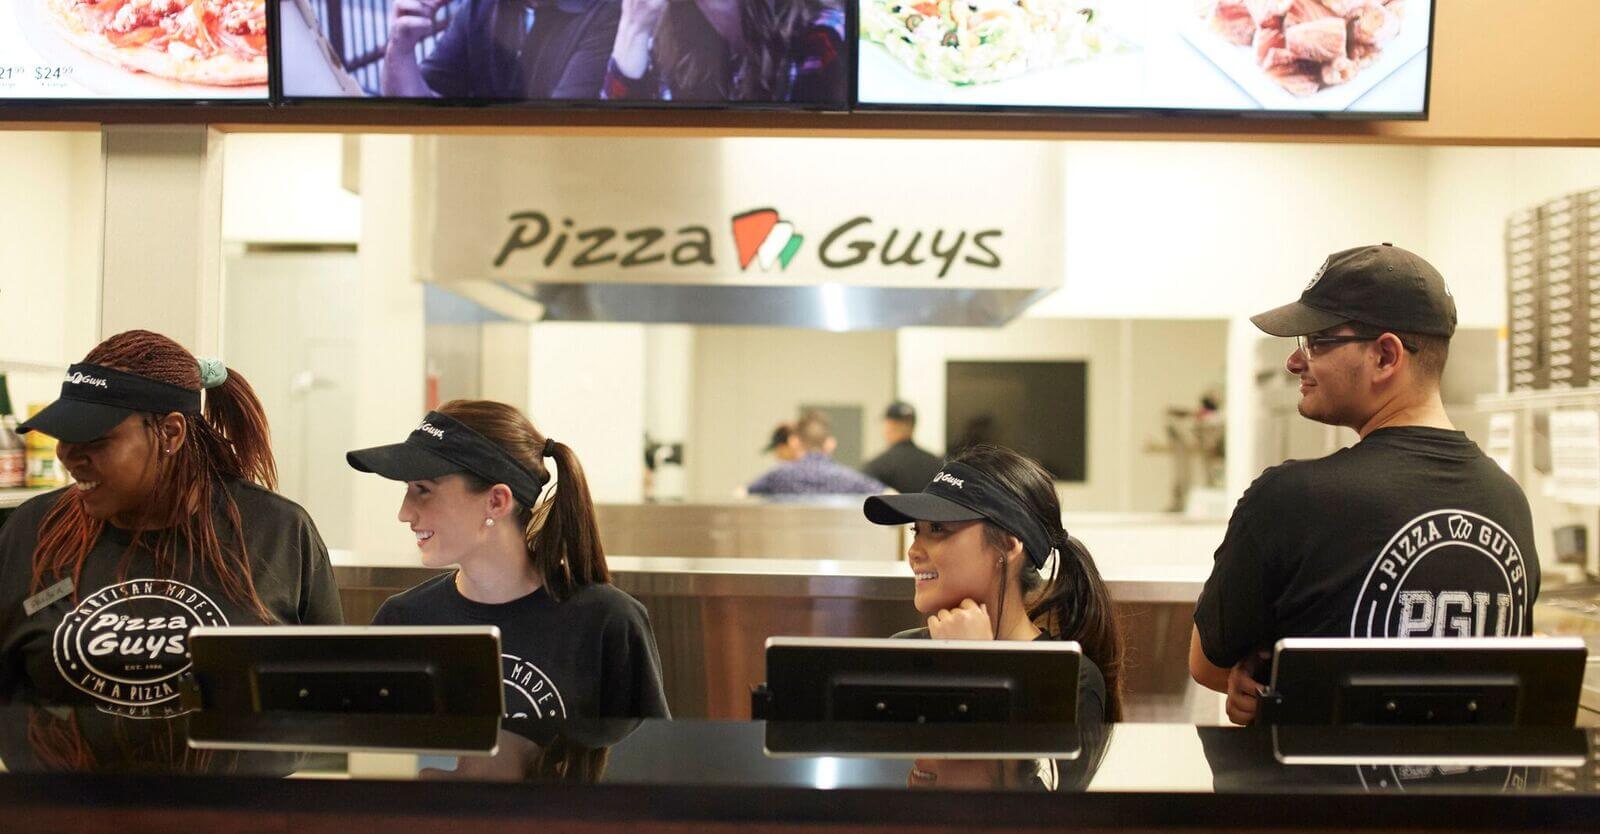 Pizza Guys Employees Smiling